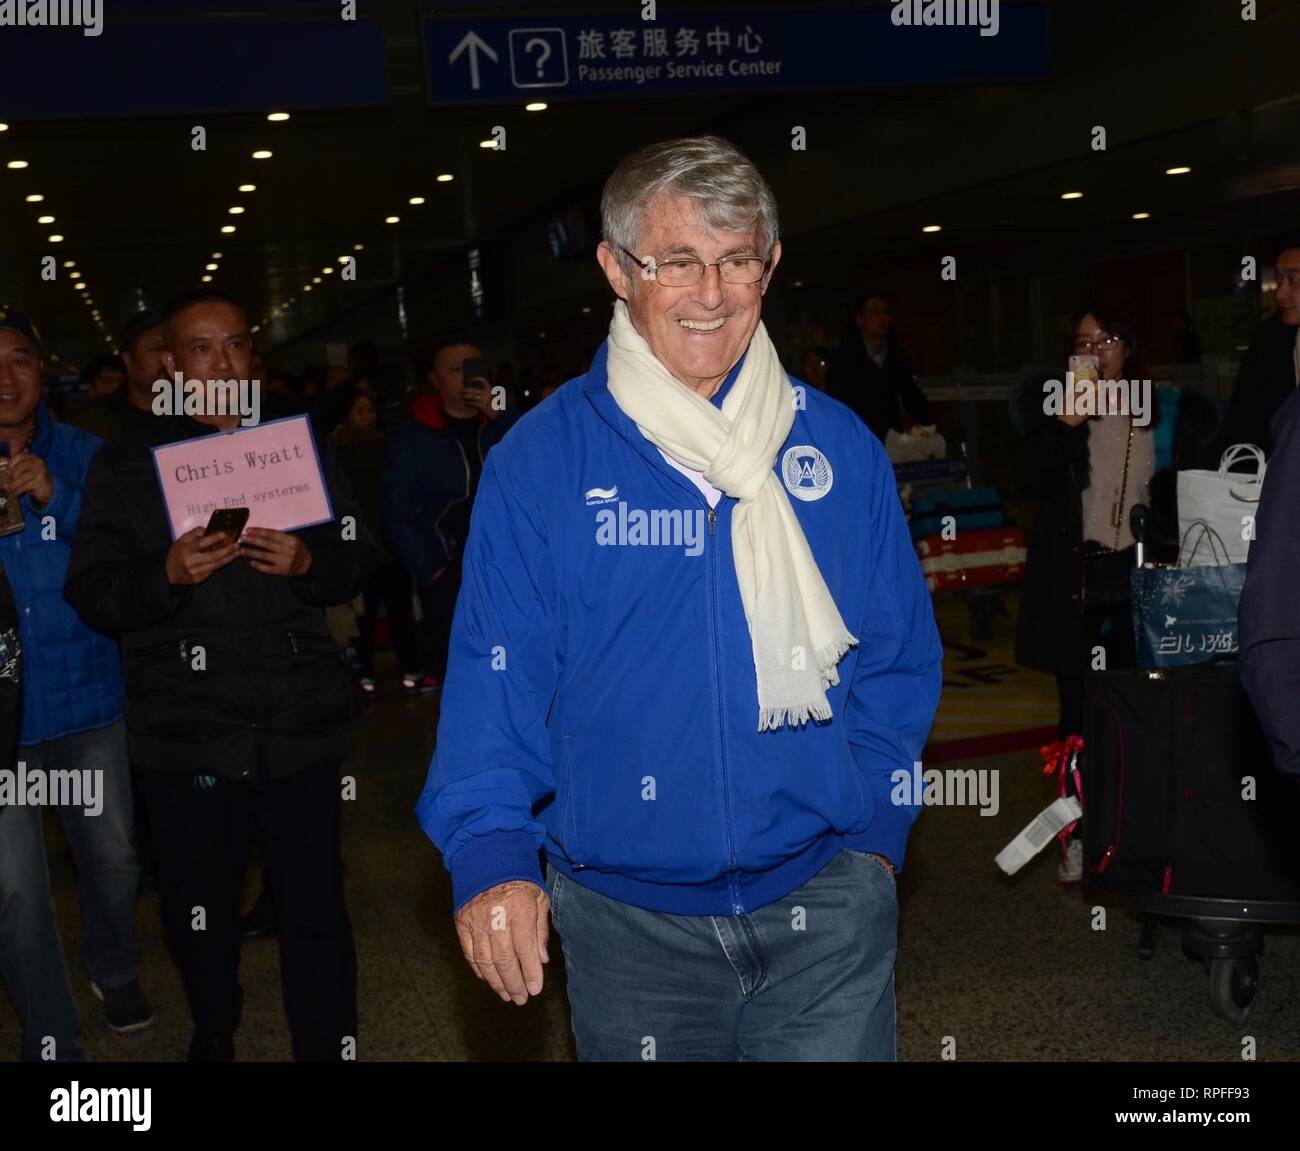 Shanghai, Shanghai, China. 22nd Feb, 2019. Shanghai, CHINA-Bora Milutinovic, the former coach of Chinese national menÃ¢â‚¬â„¢s football team, is spotted at the Pudong International Airport in Shanghai, China. Credit: SIPA Asia/ZUMA Wire/Alamy Live News Stock Photo